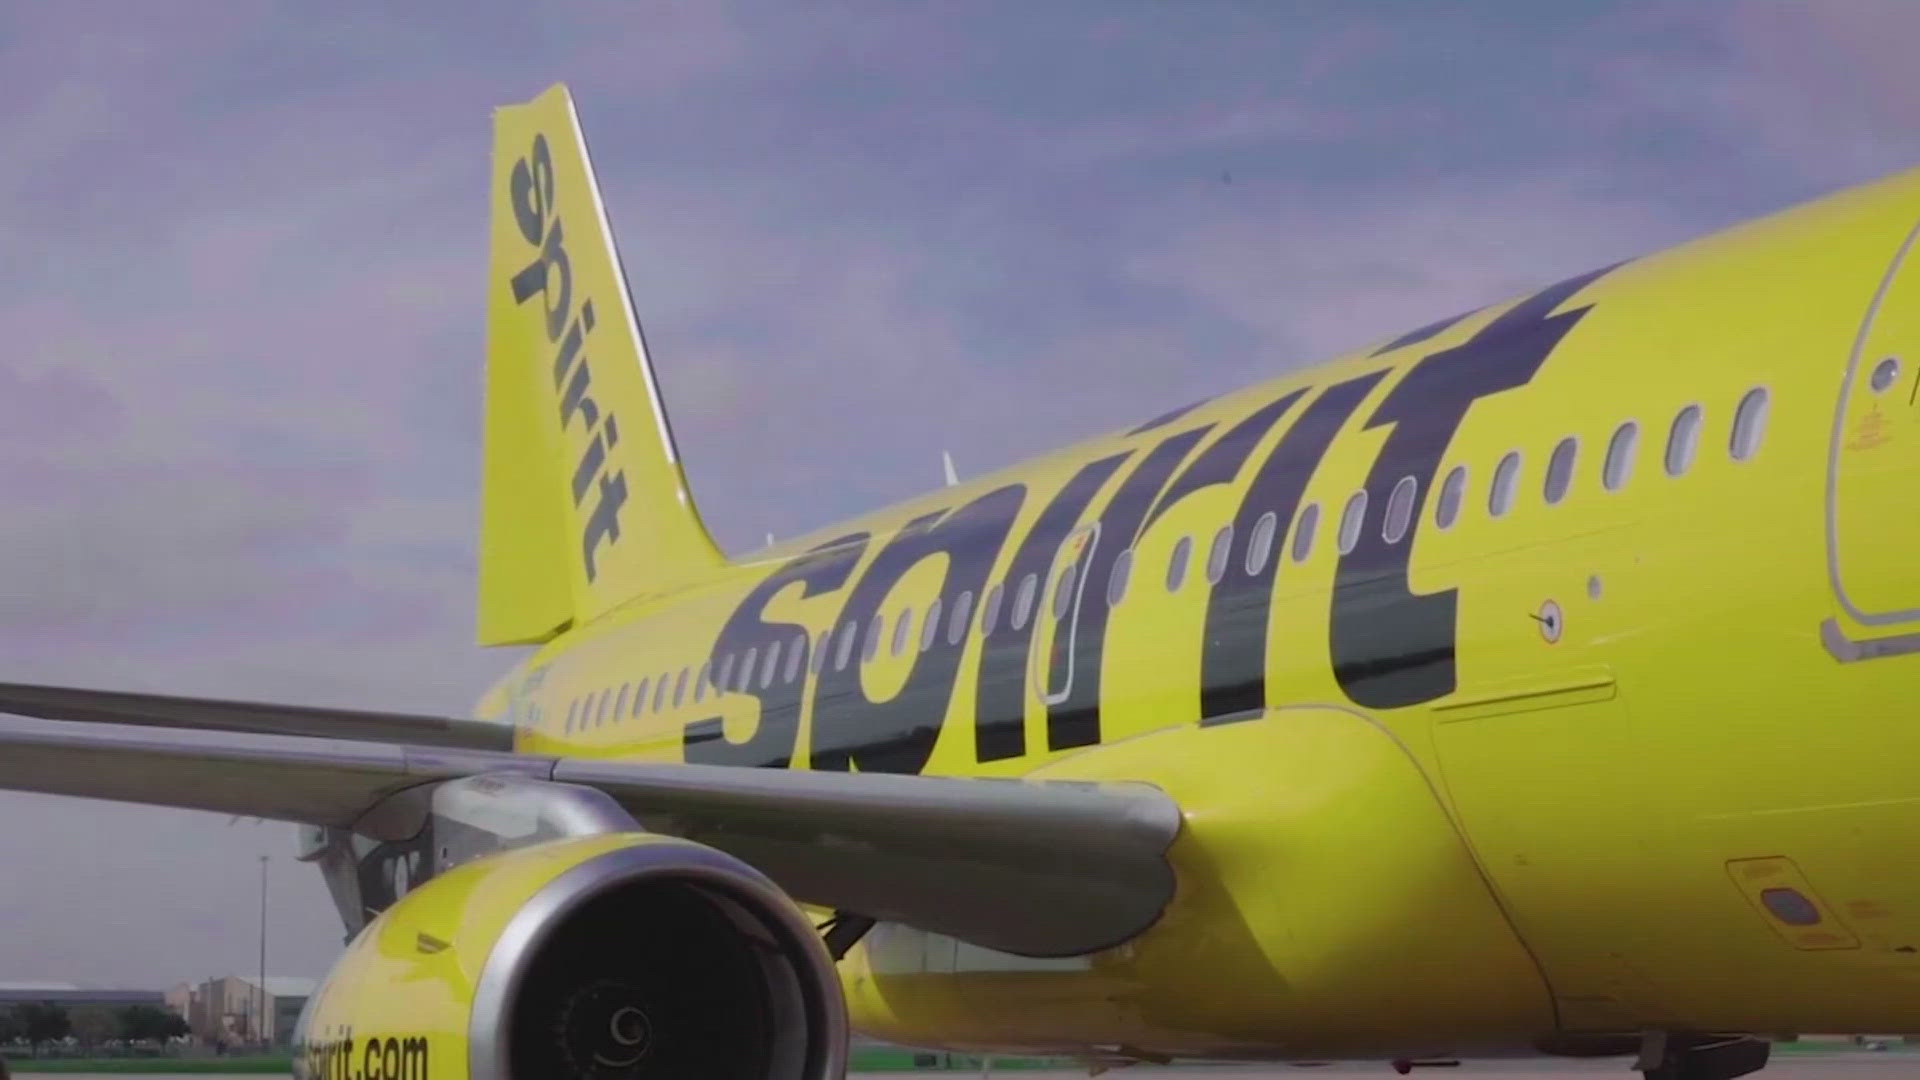 These upgrades will be available on Spirit Airlines flights starting Aug. 16.